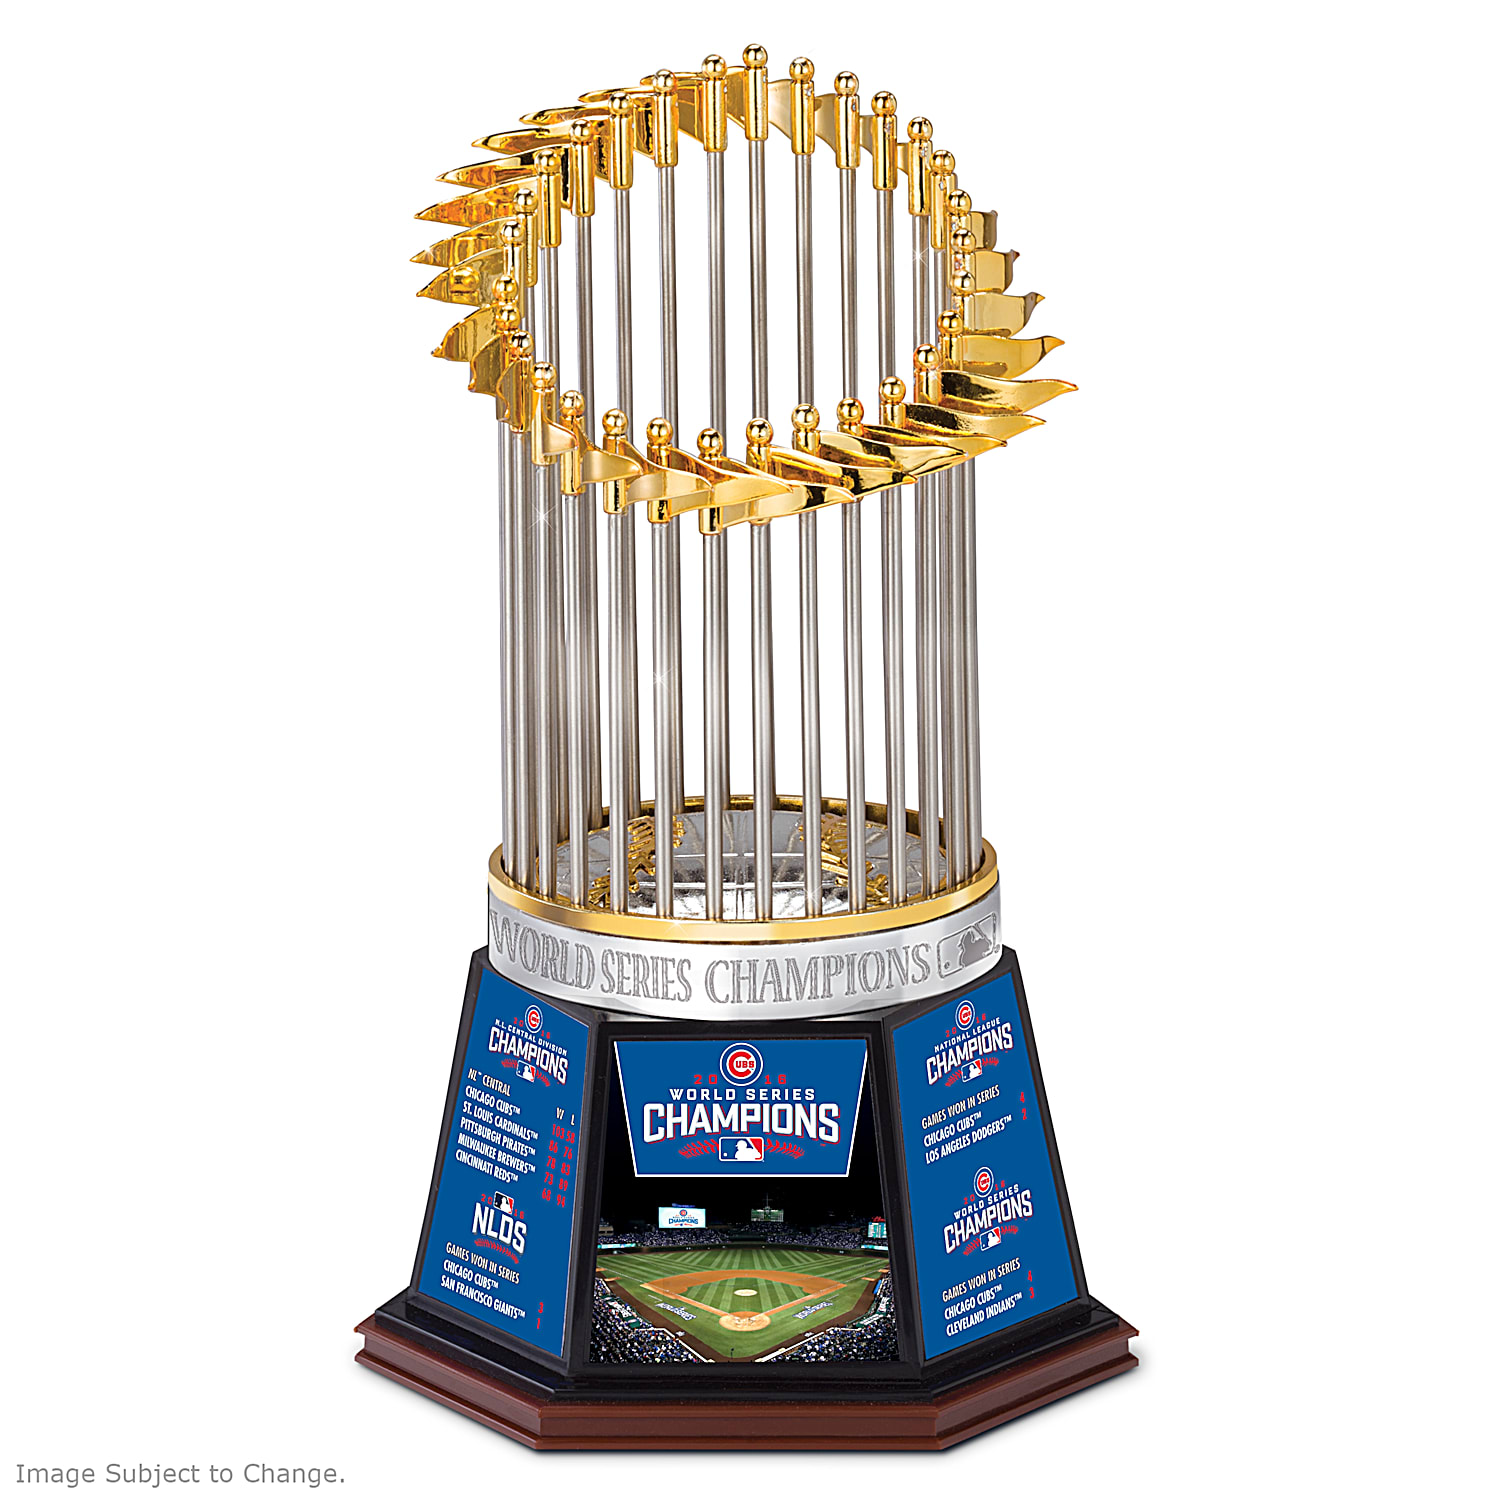 Chicago Cubs 2016 World Series Champions Commemorative Blu-Ray